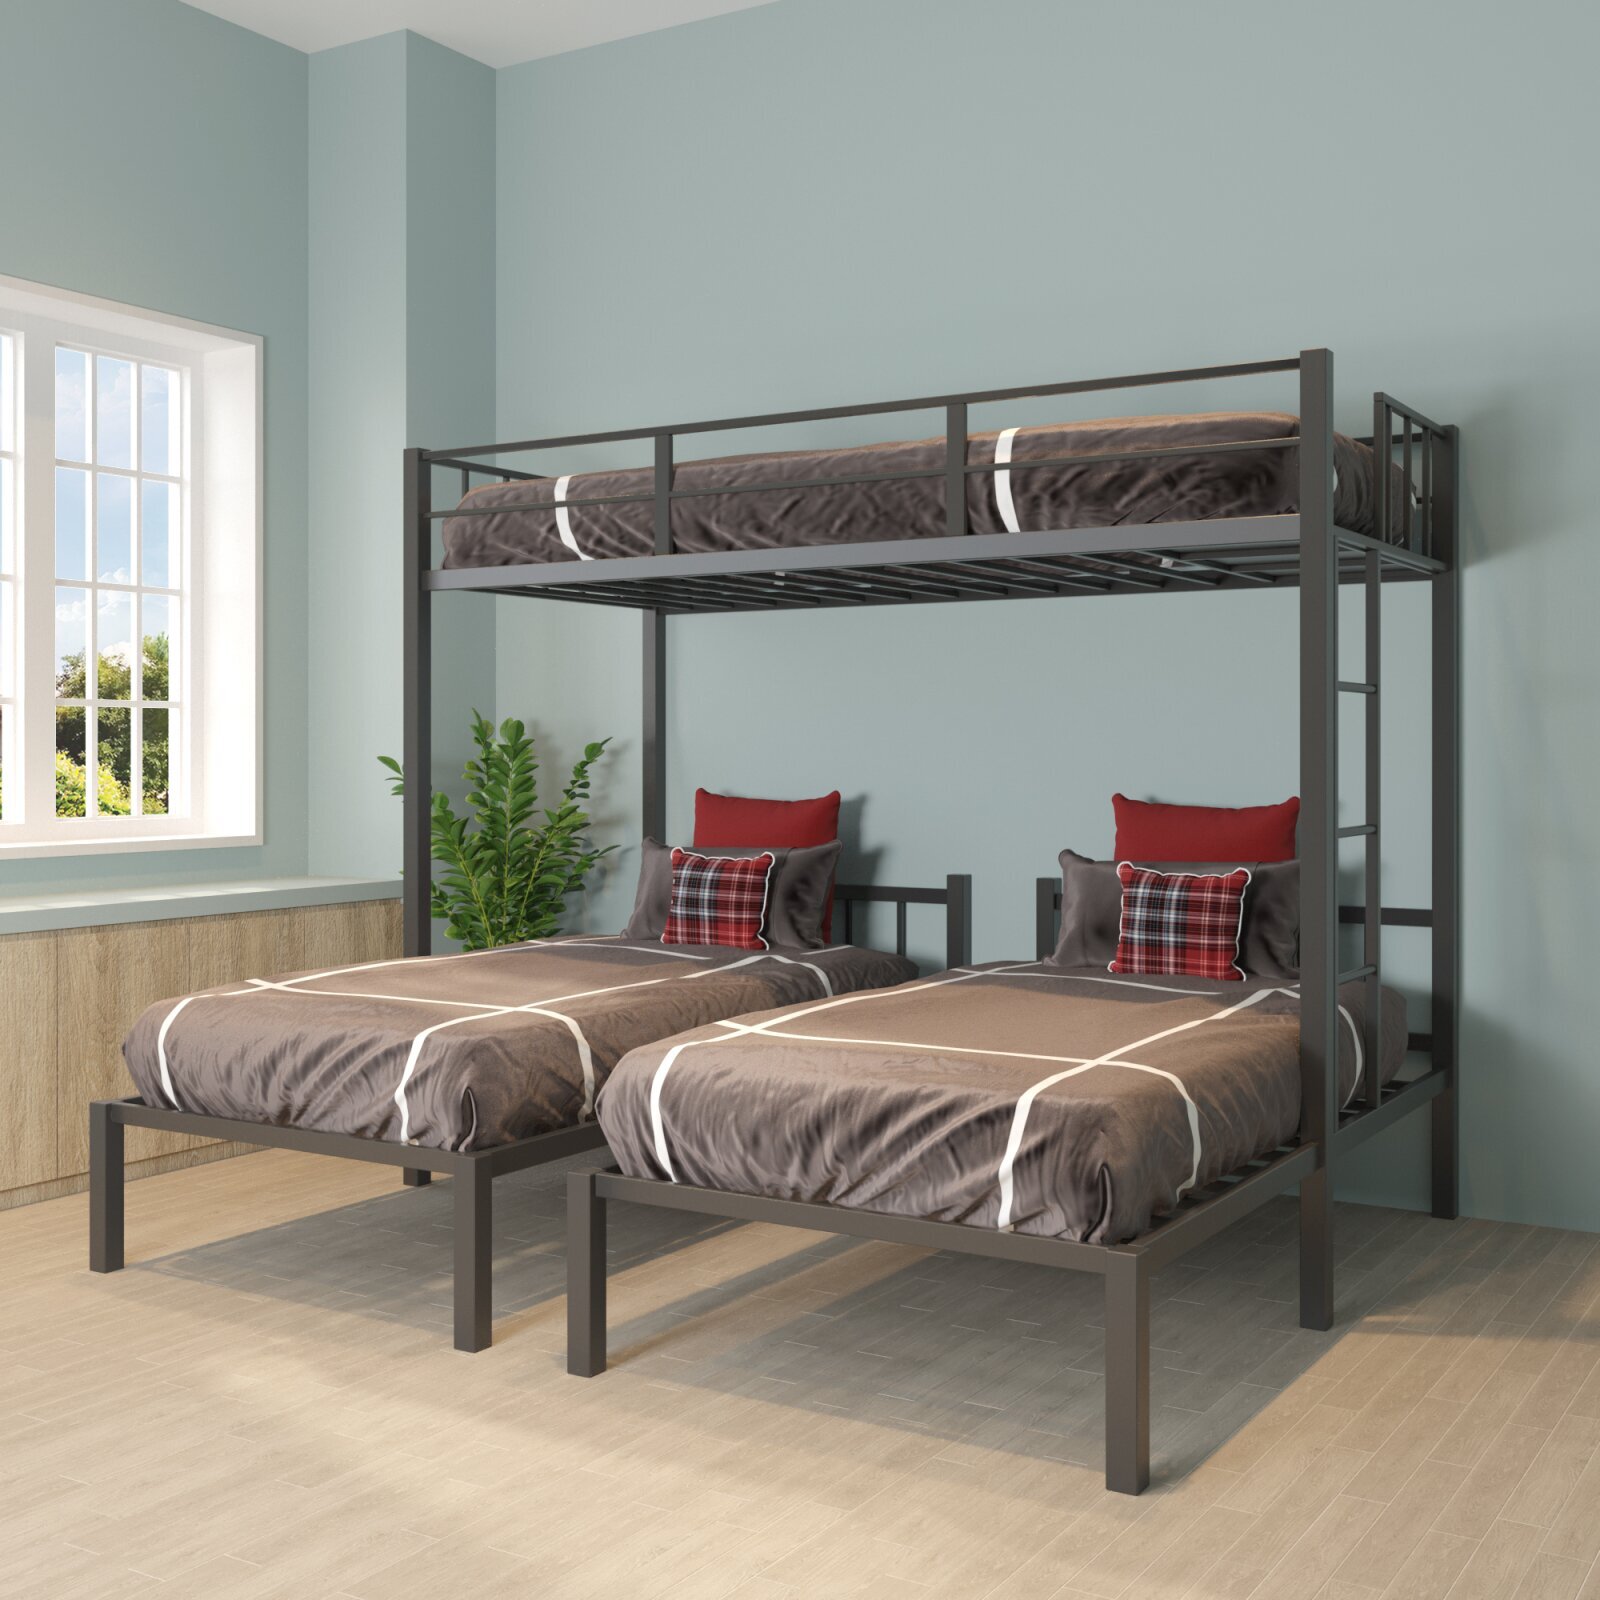 Triple Sleeper Beds With Two Singles and One Bunk